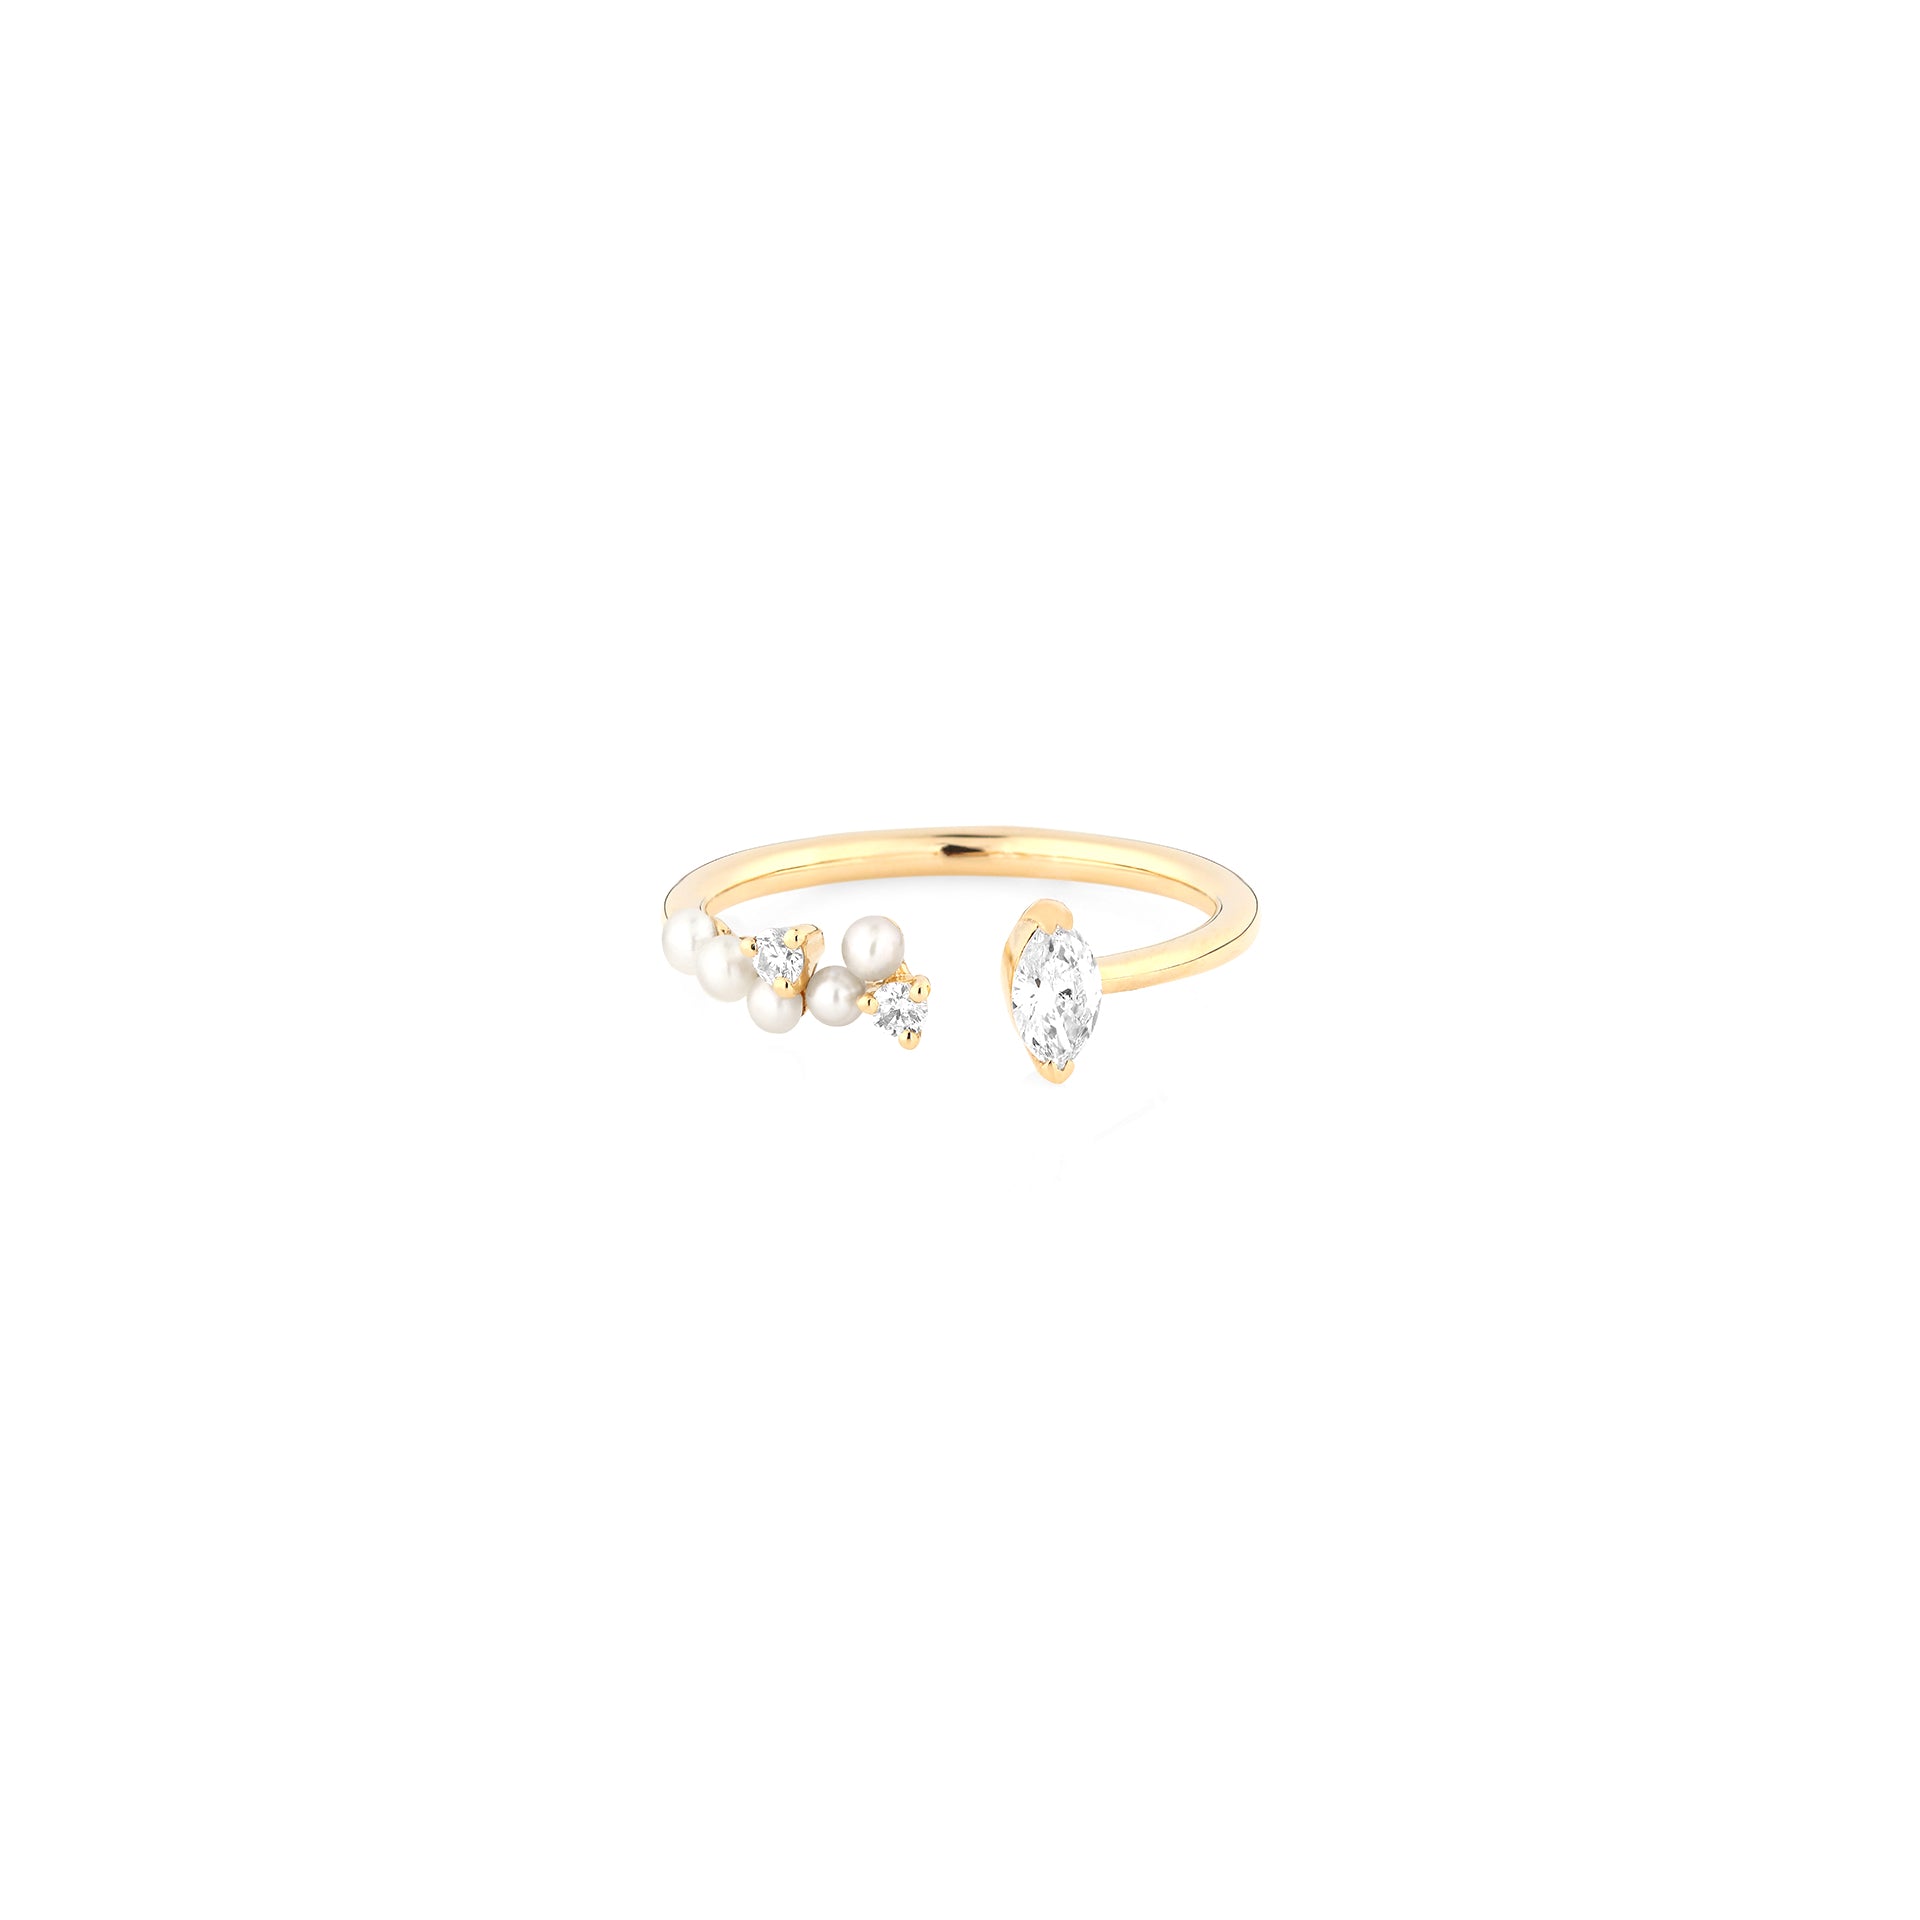 Mystique ring collection with natural pearls and diamonds in yellow gold